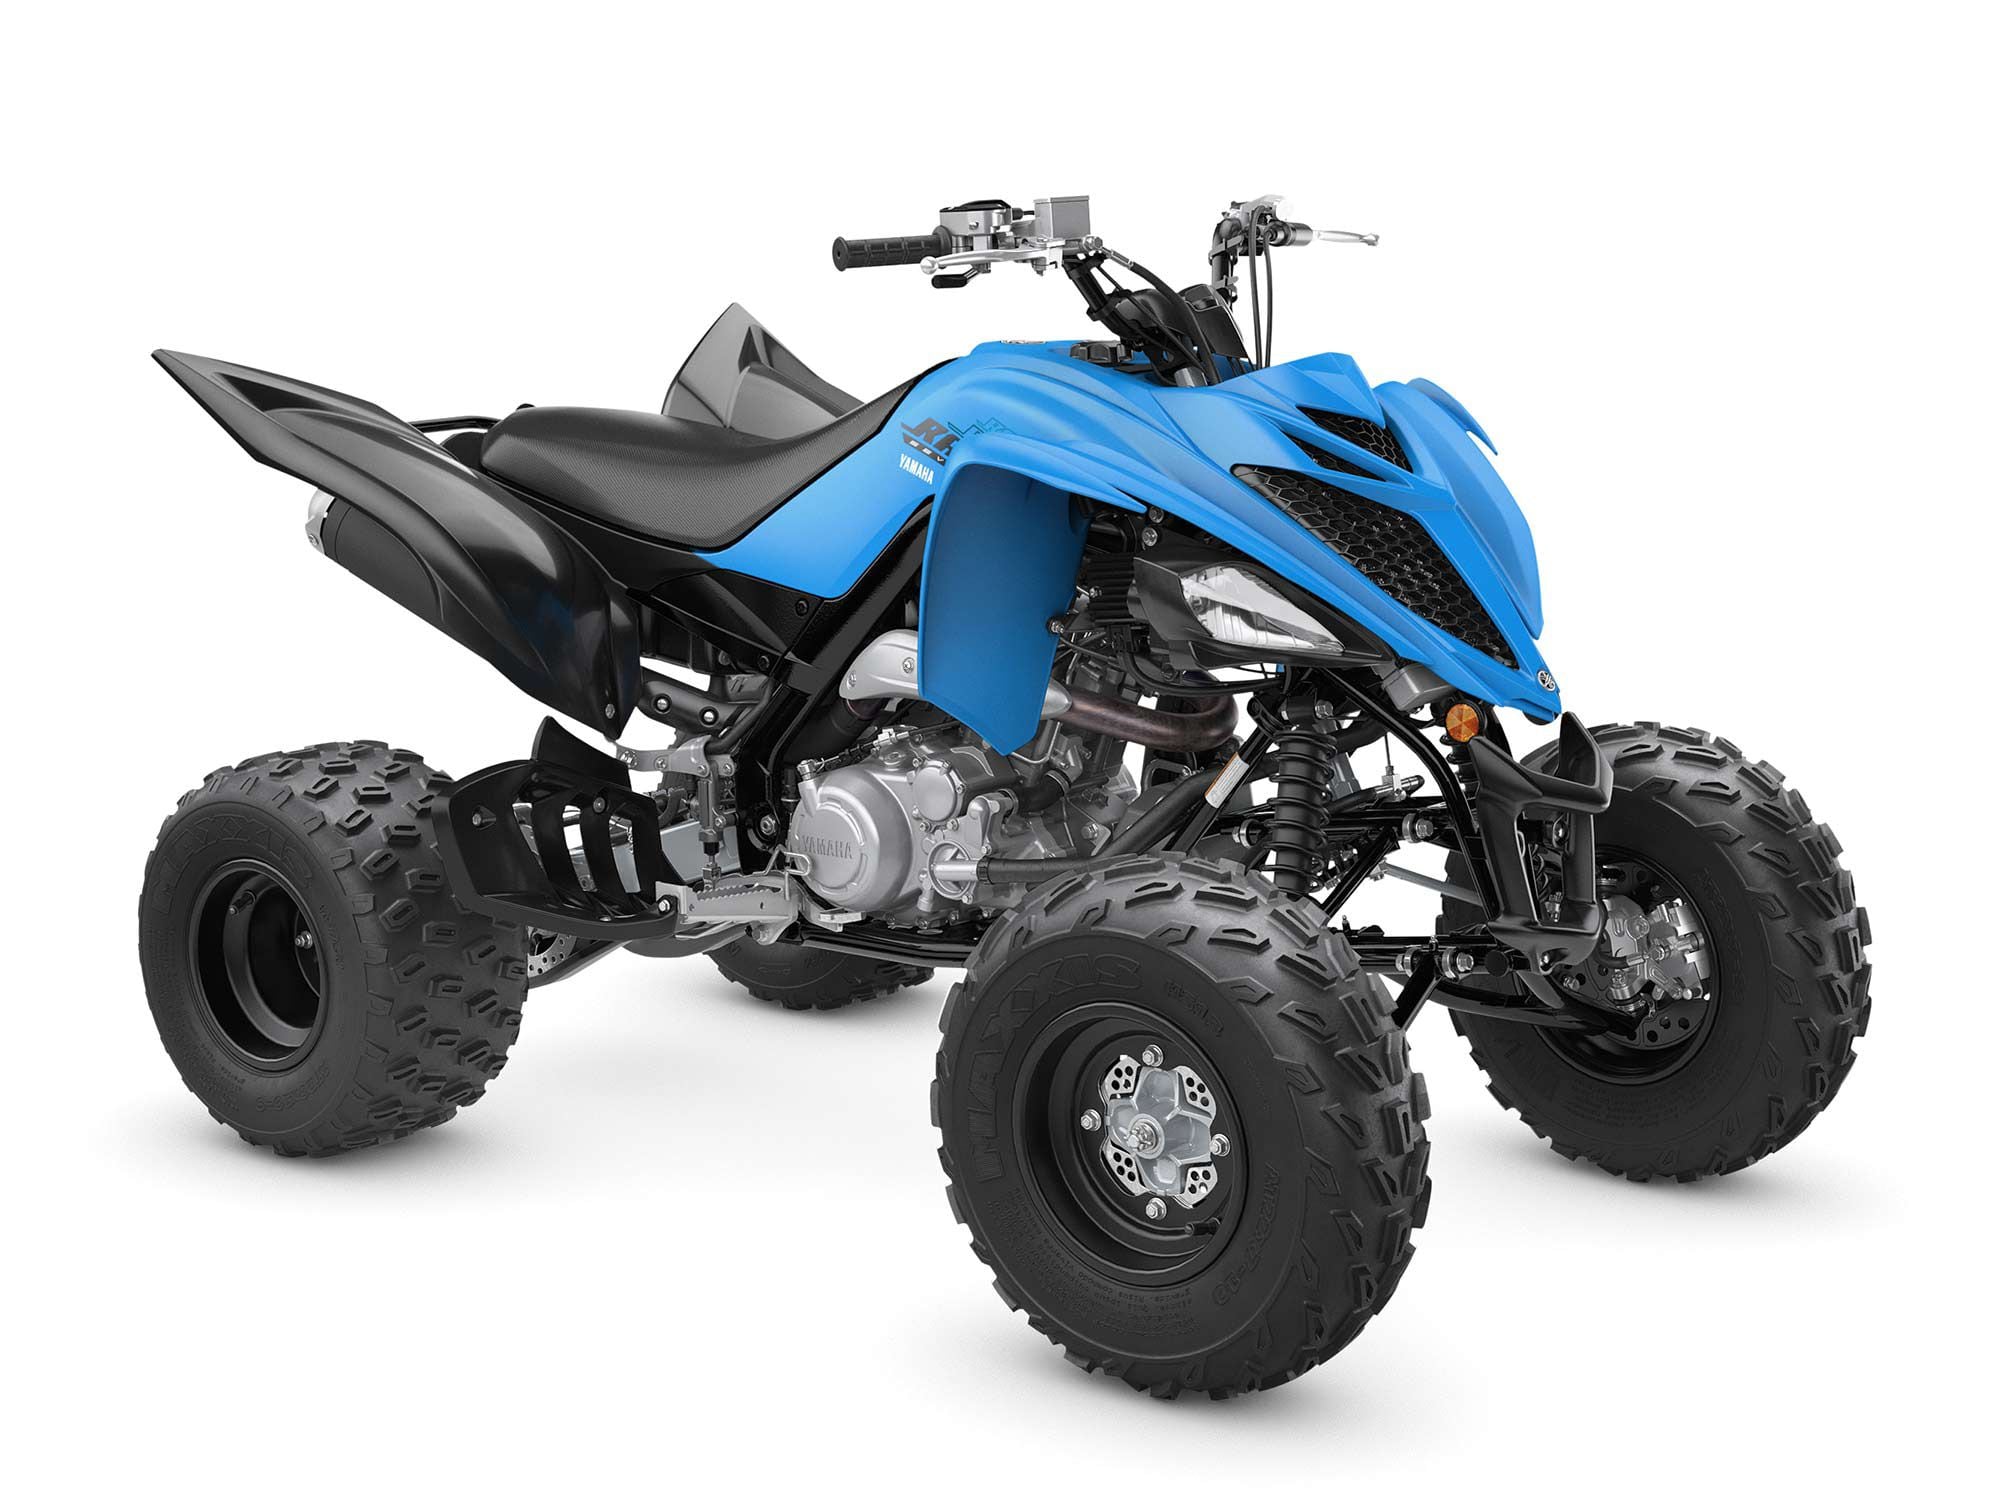 Yamaha Raptor 250 Specs and Review - Off-Roading Pro